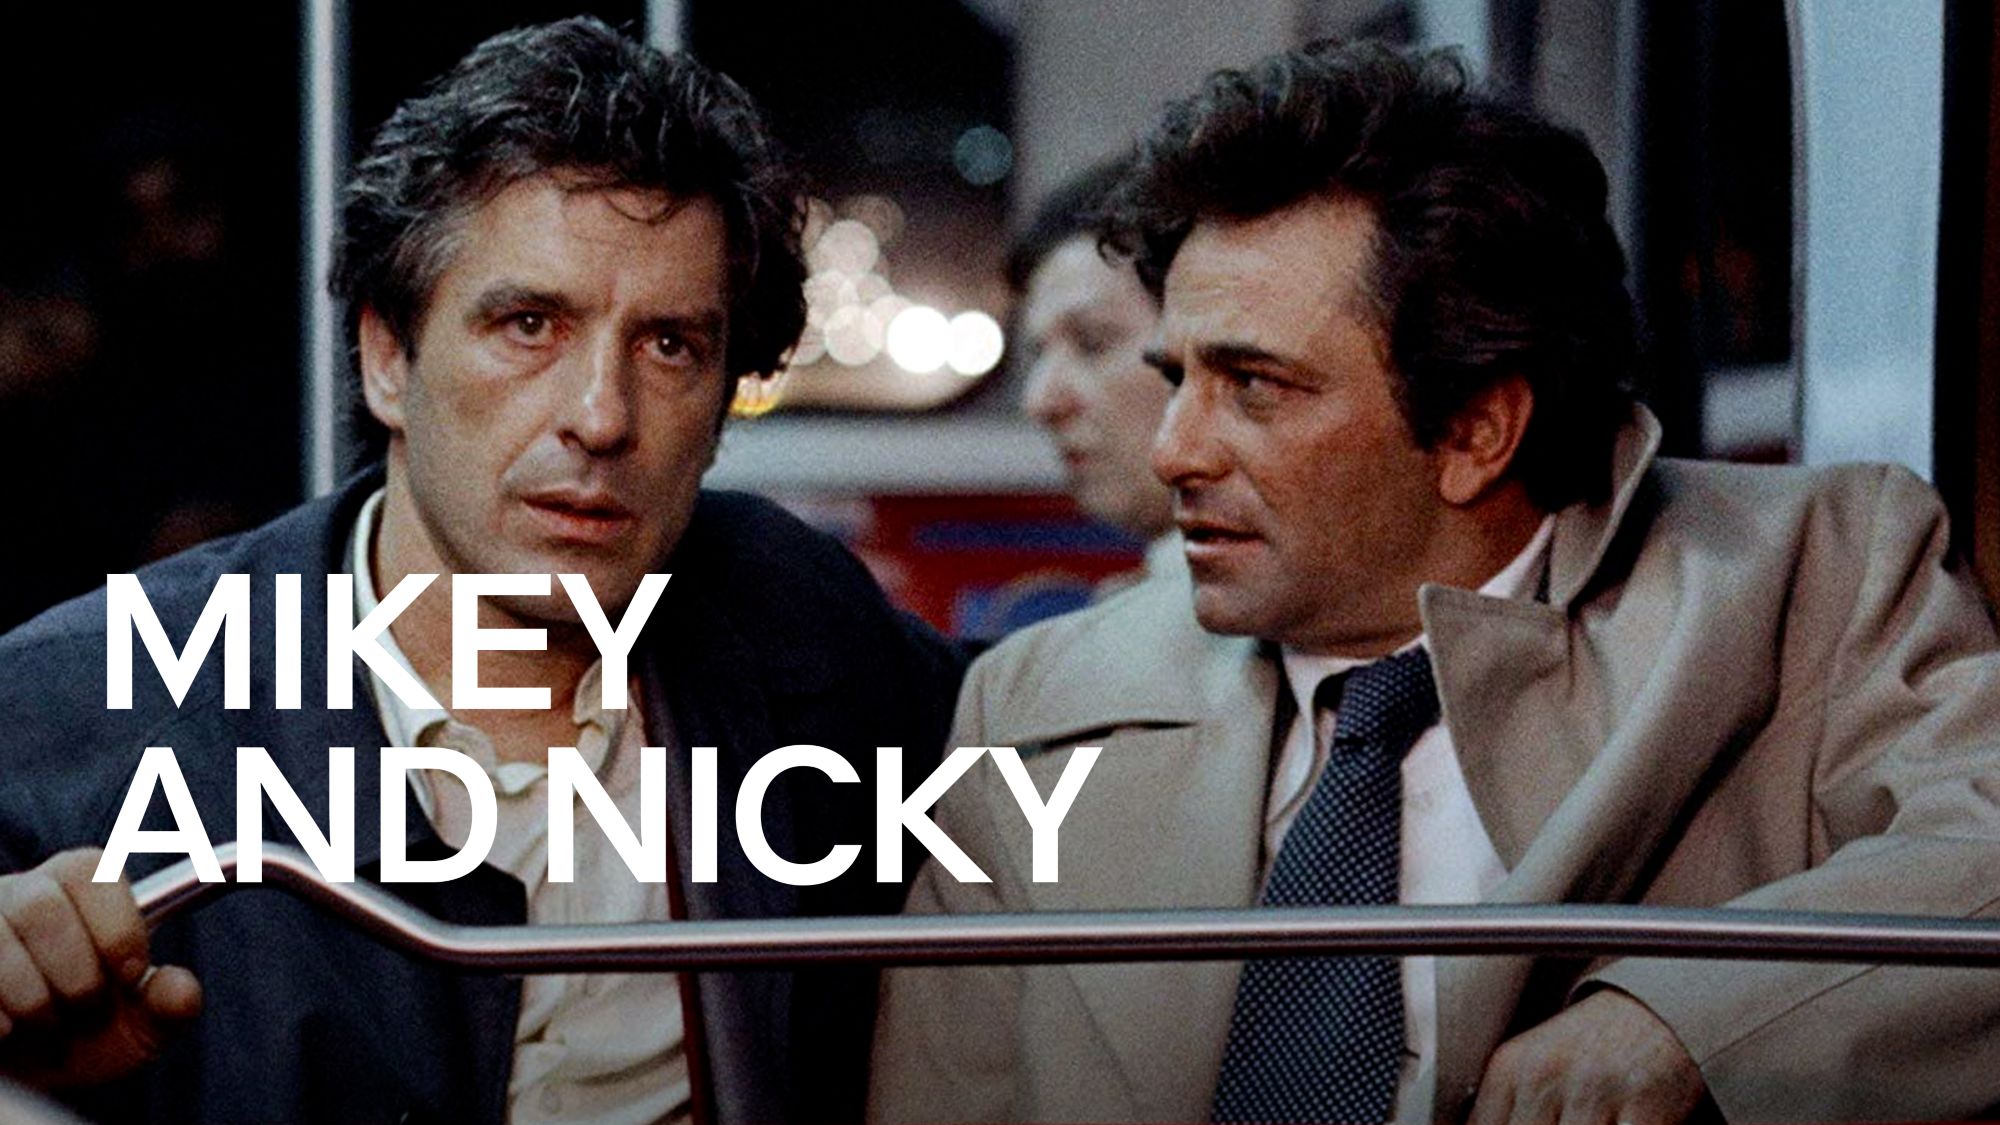 43-facts-about-the-movie-mikey-and-nicky